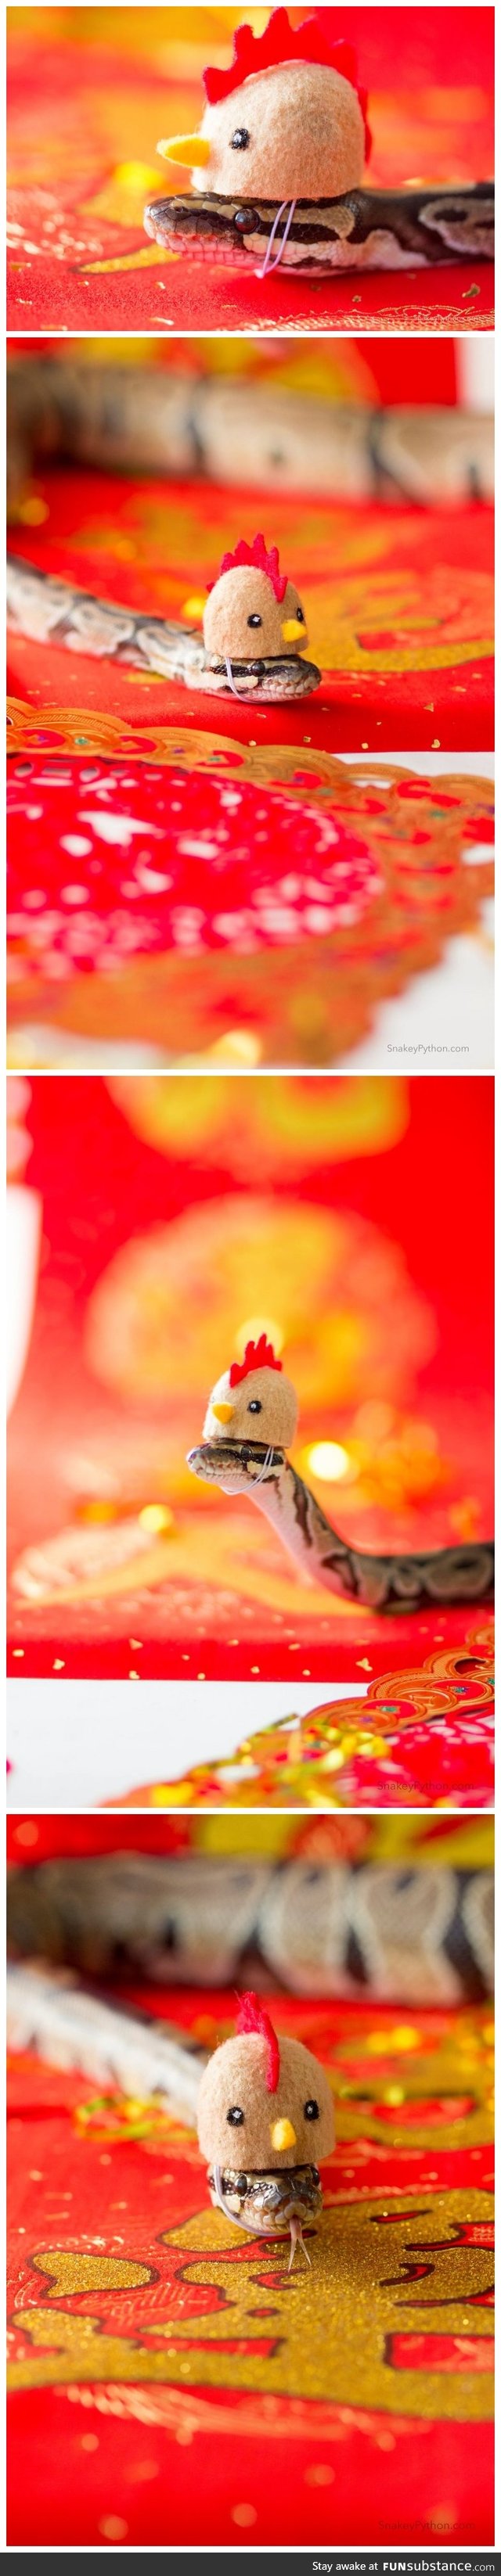 This Snek in a Rooster hat